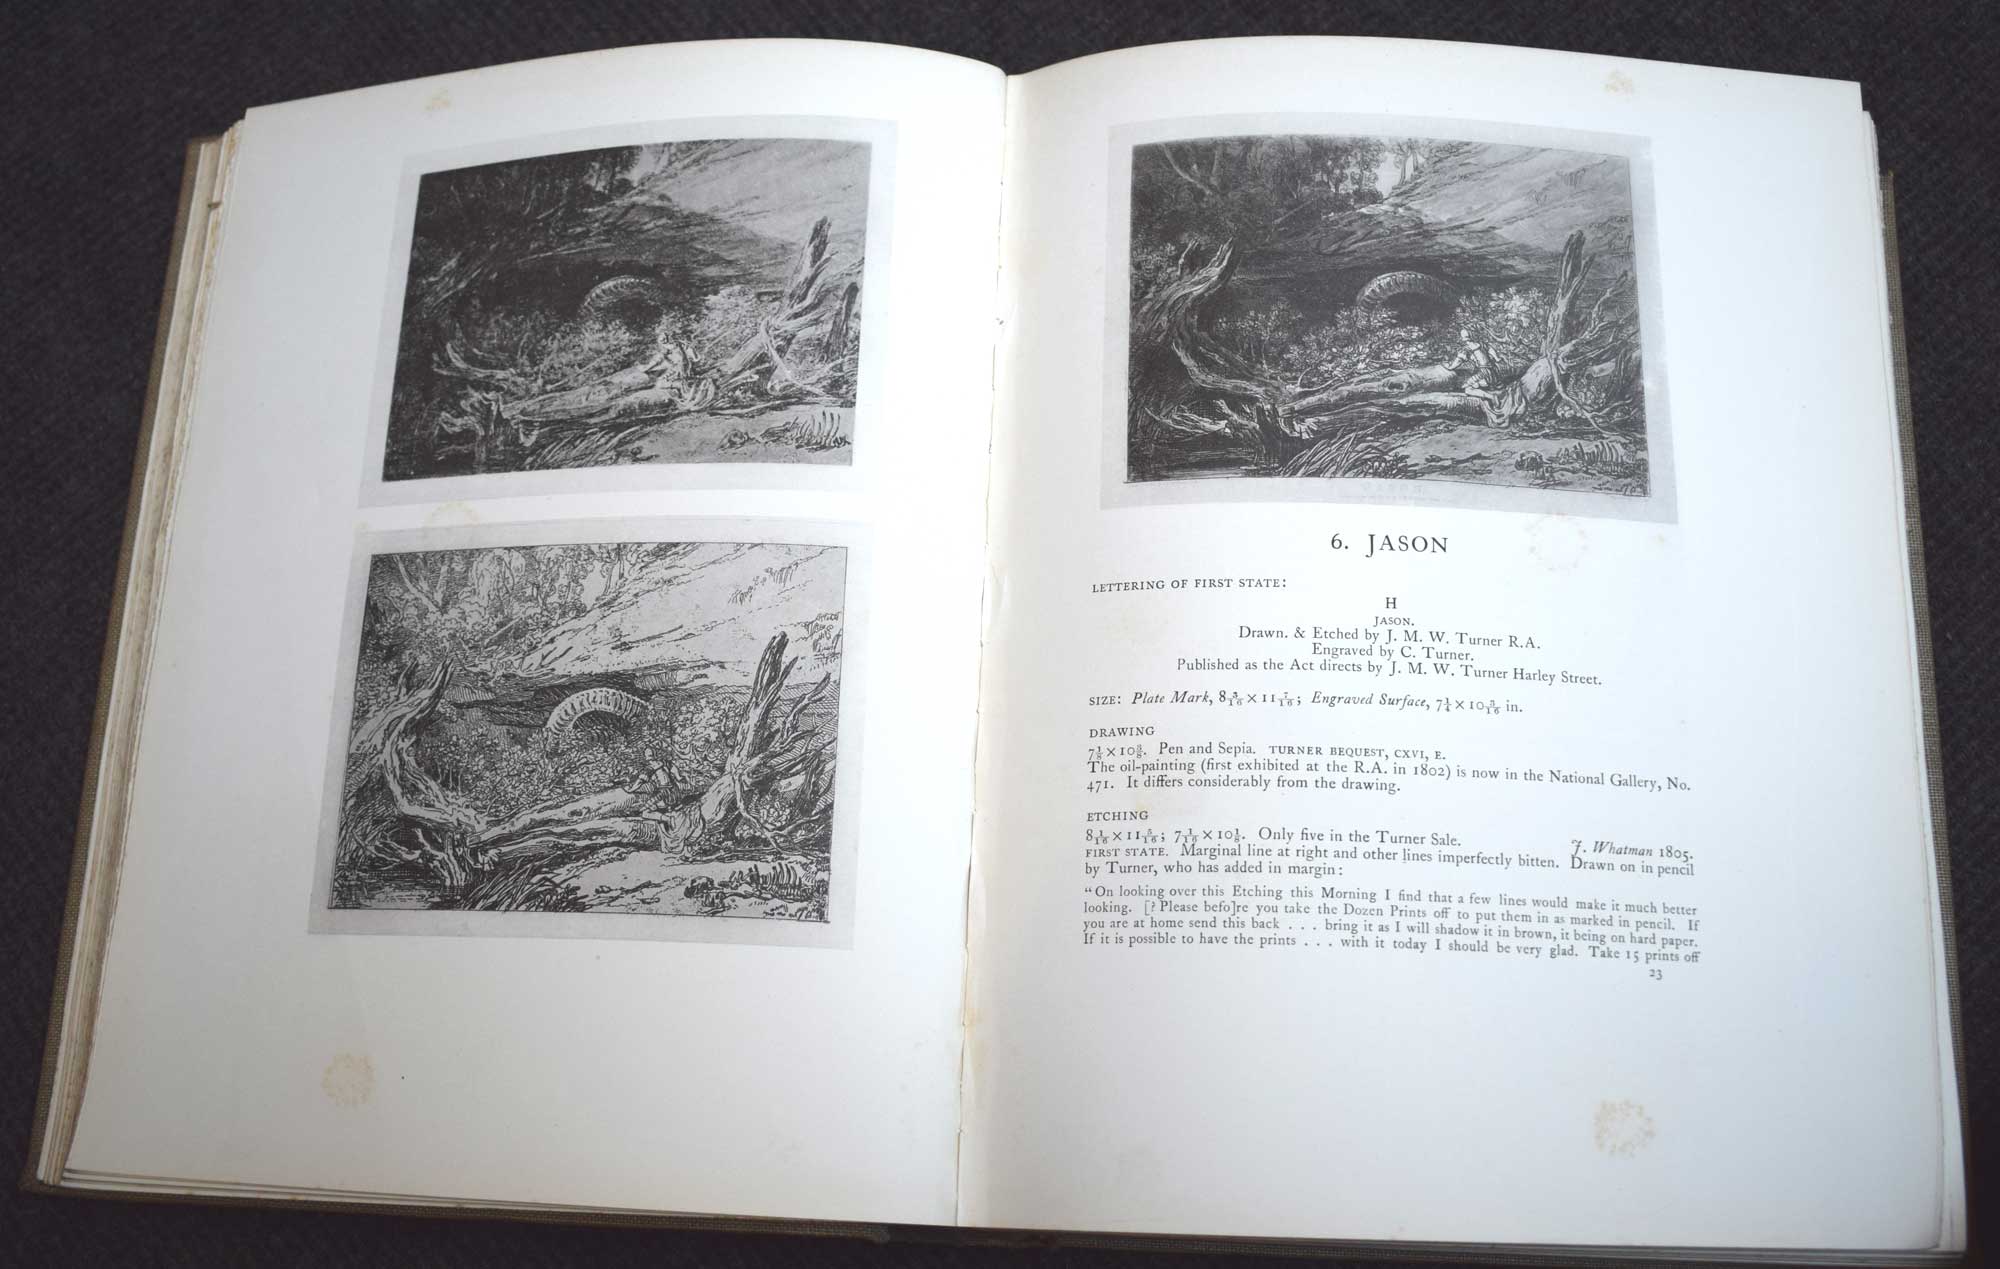 The History of Turner's Liber Studiorum with a New Catalogue Raisonne. Signed Limited Edition.